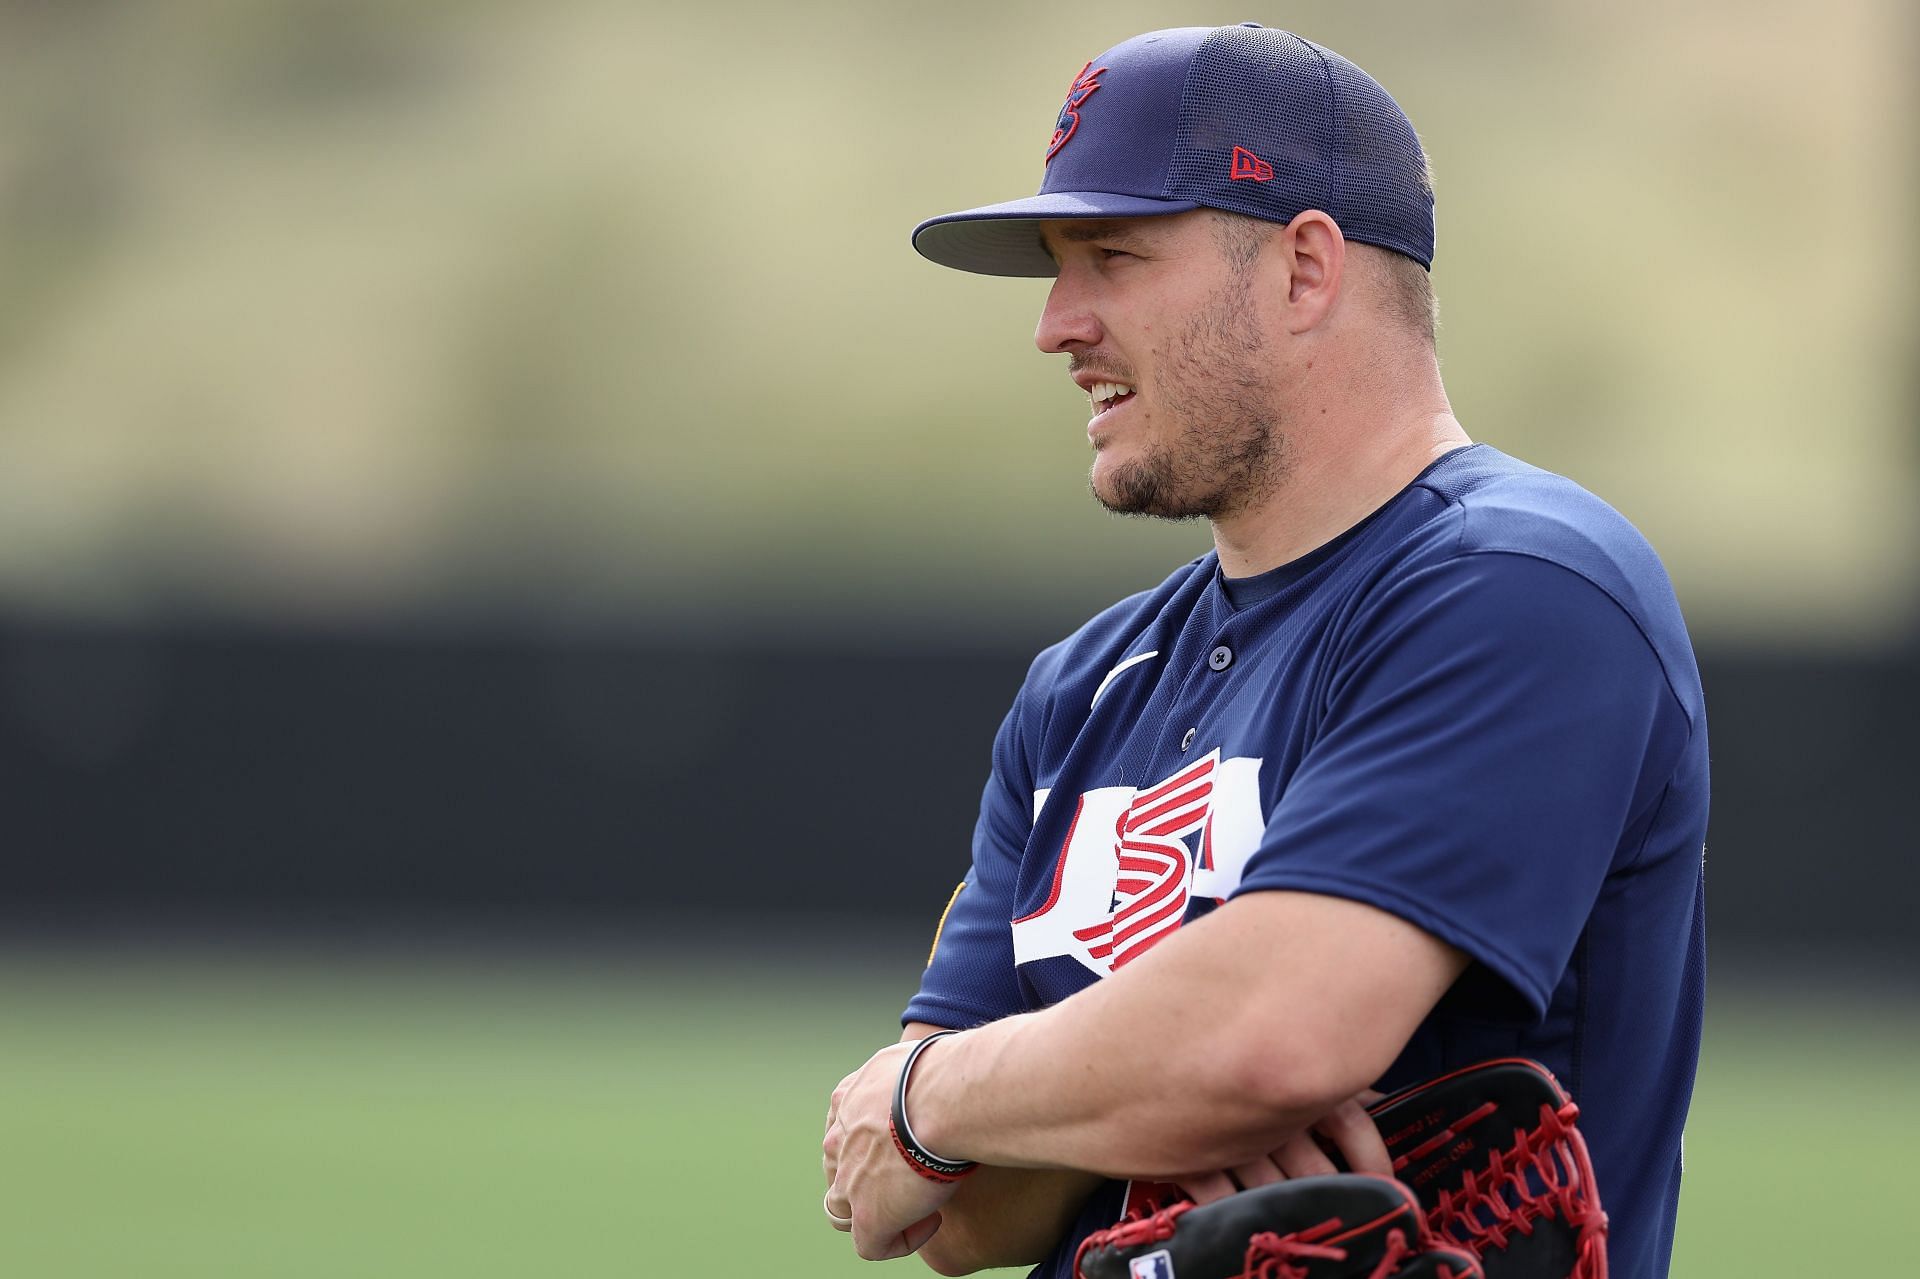 Mike Trout has been CLUTCH for Team USA during Pool Play! (Hit